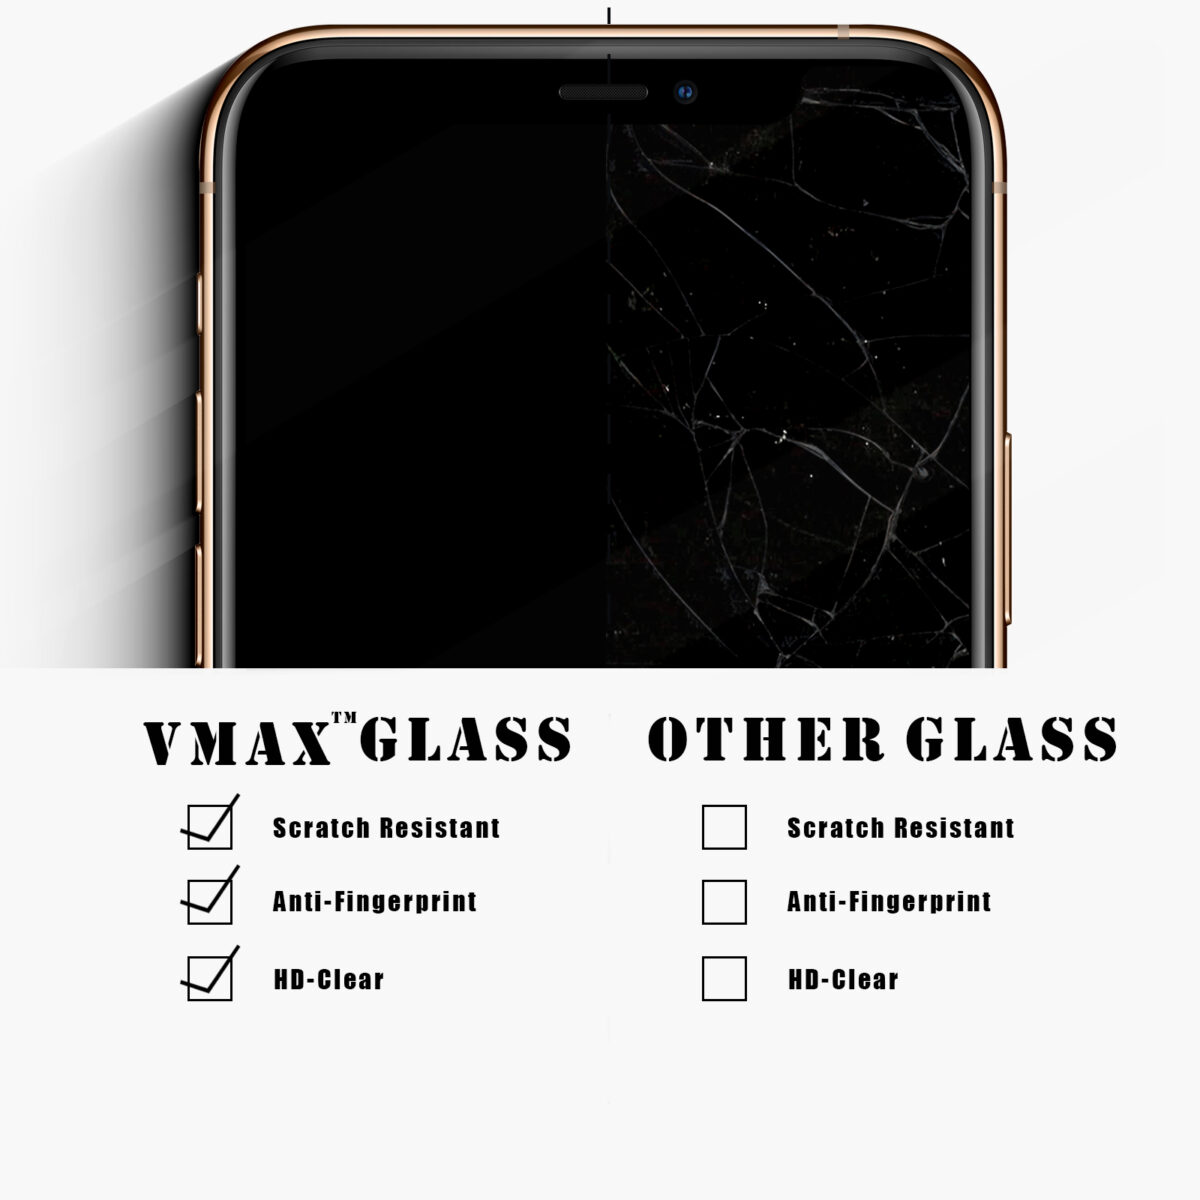 Vmax Tempered Glass screen protectors for iPhone 11